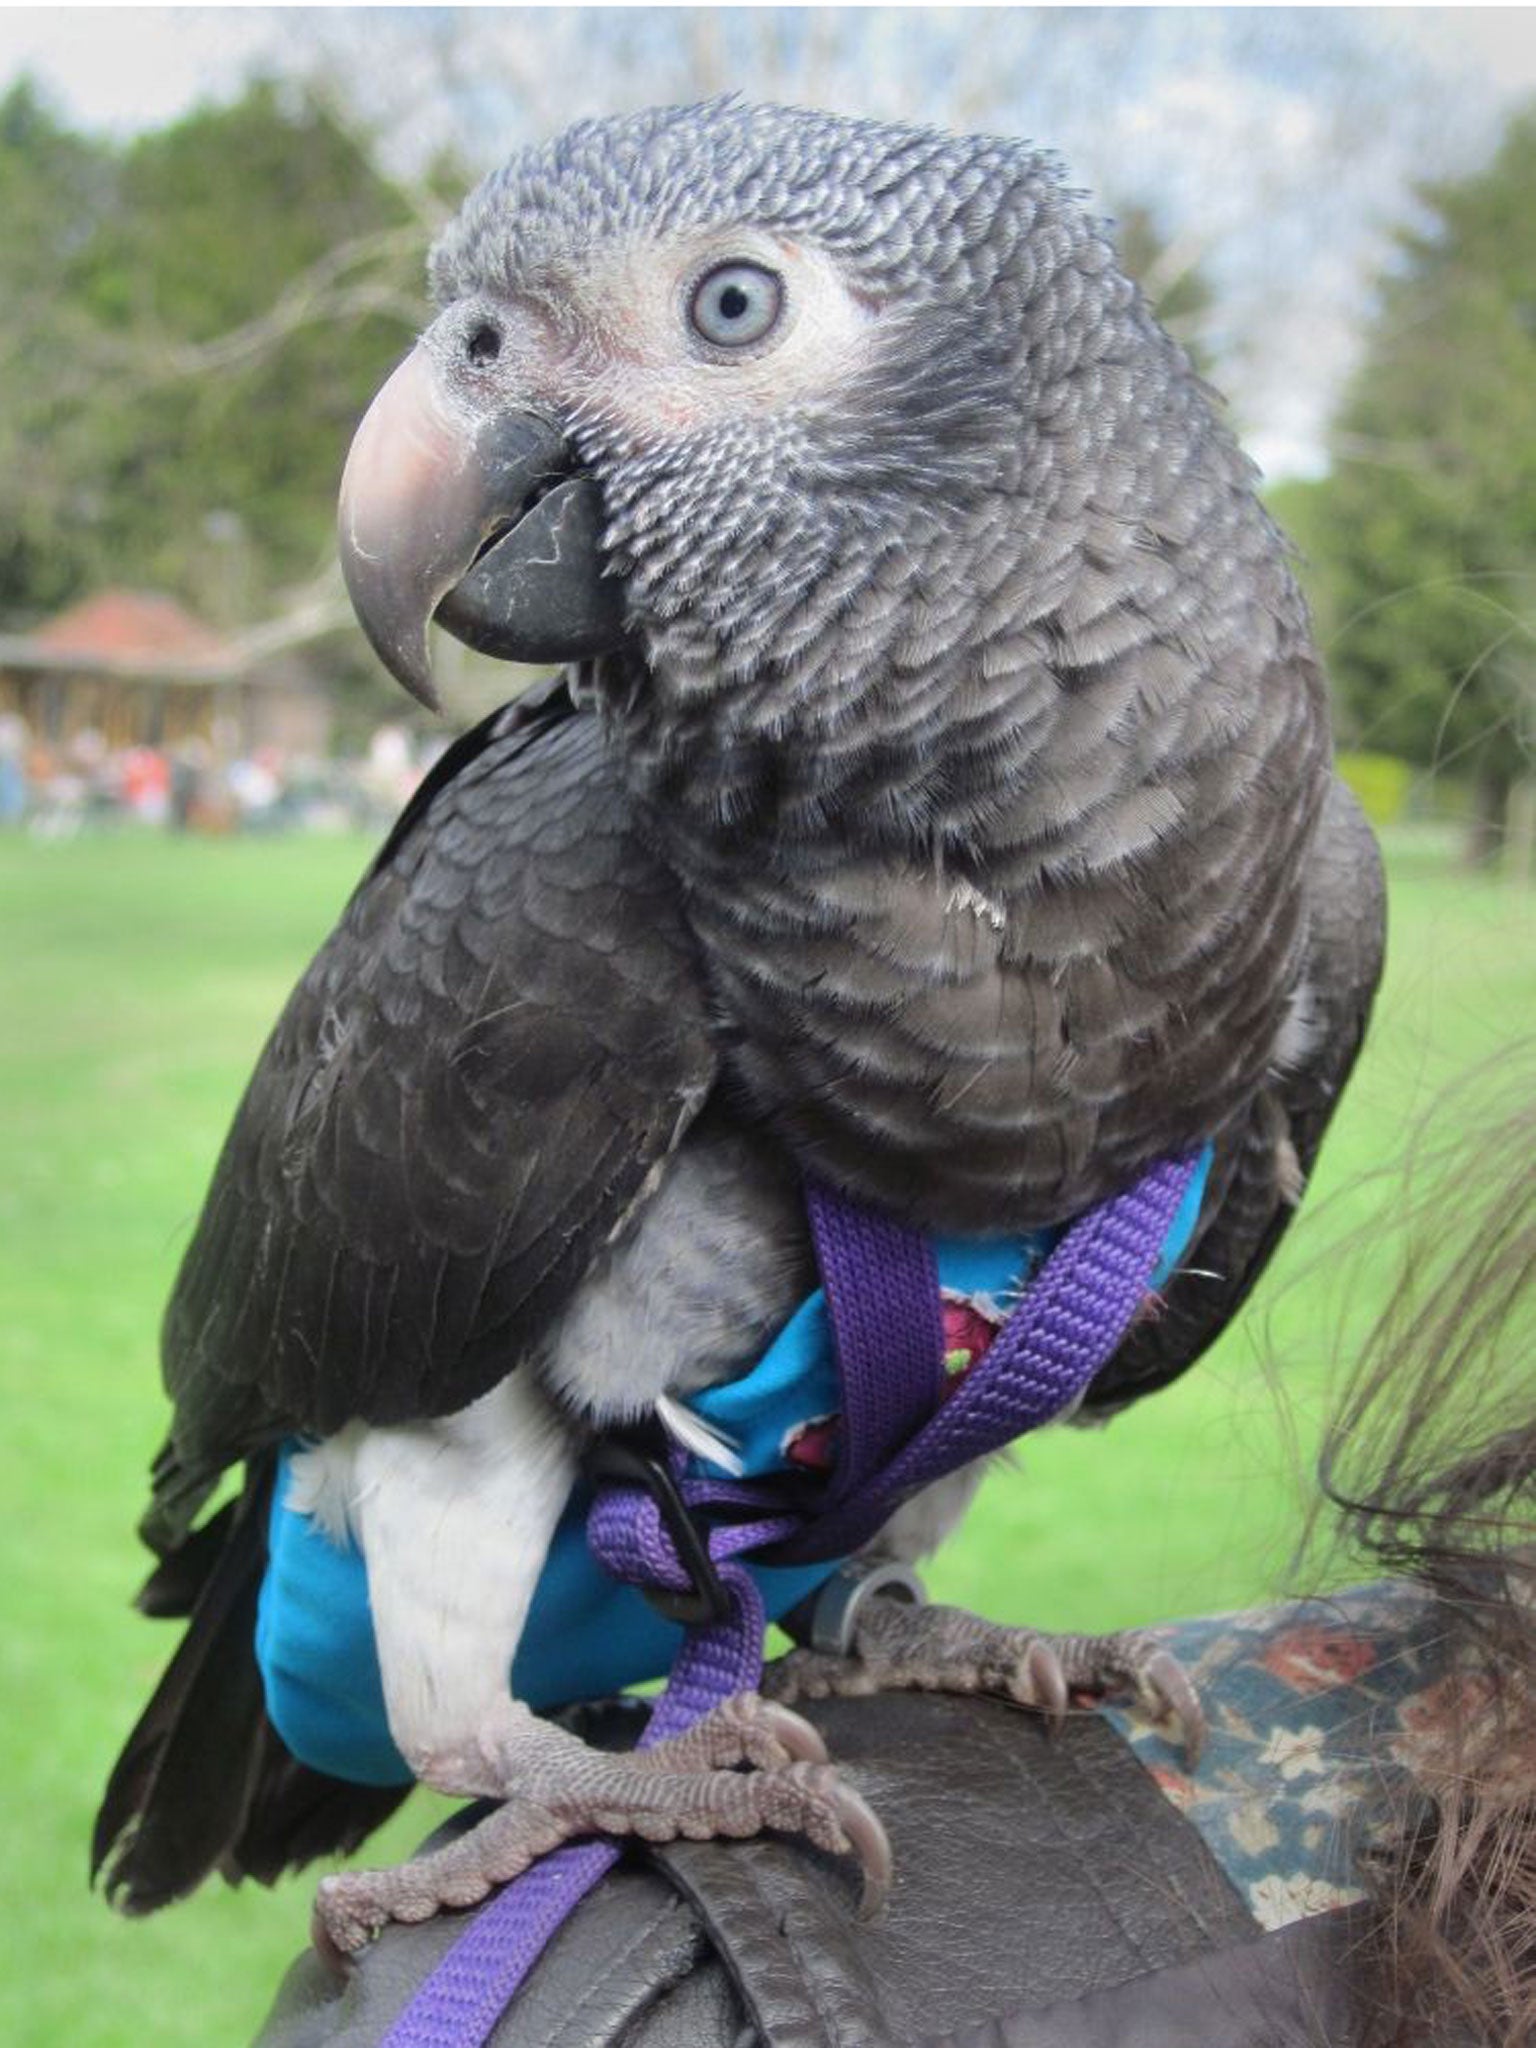 Wunsy, the African grey parrot